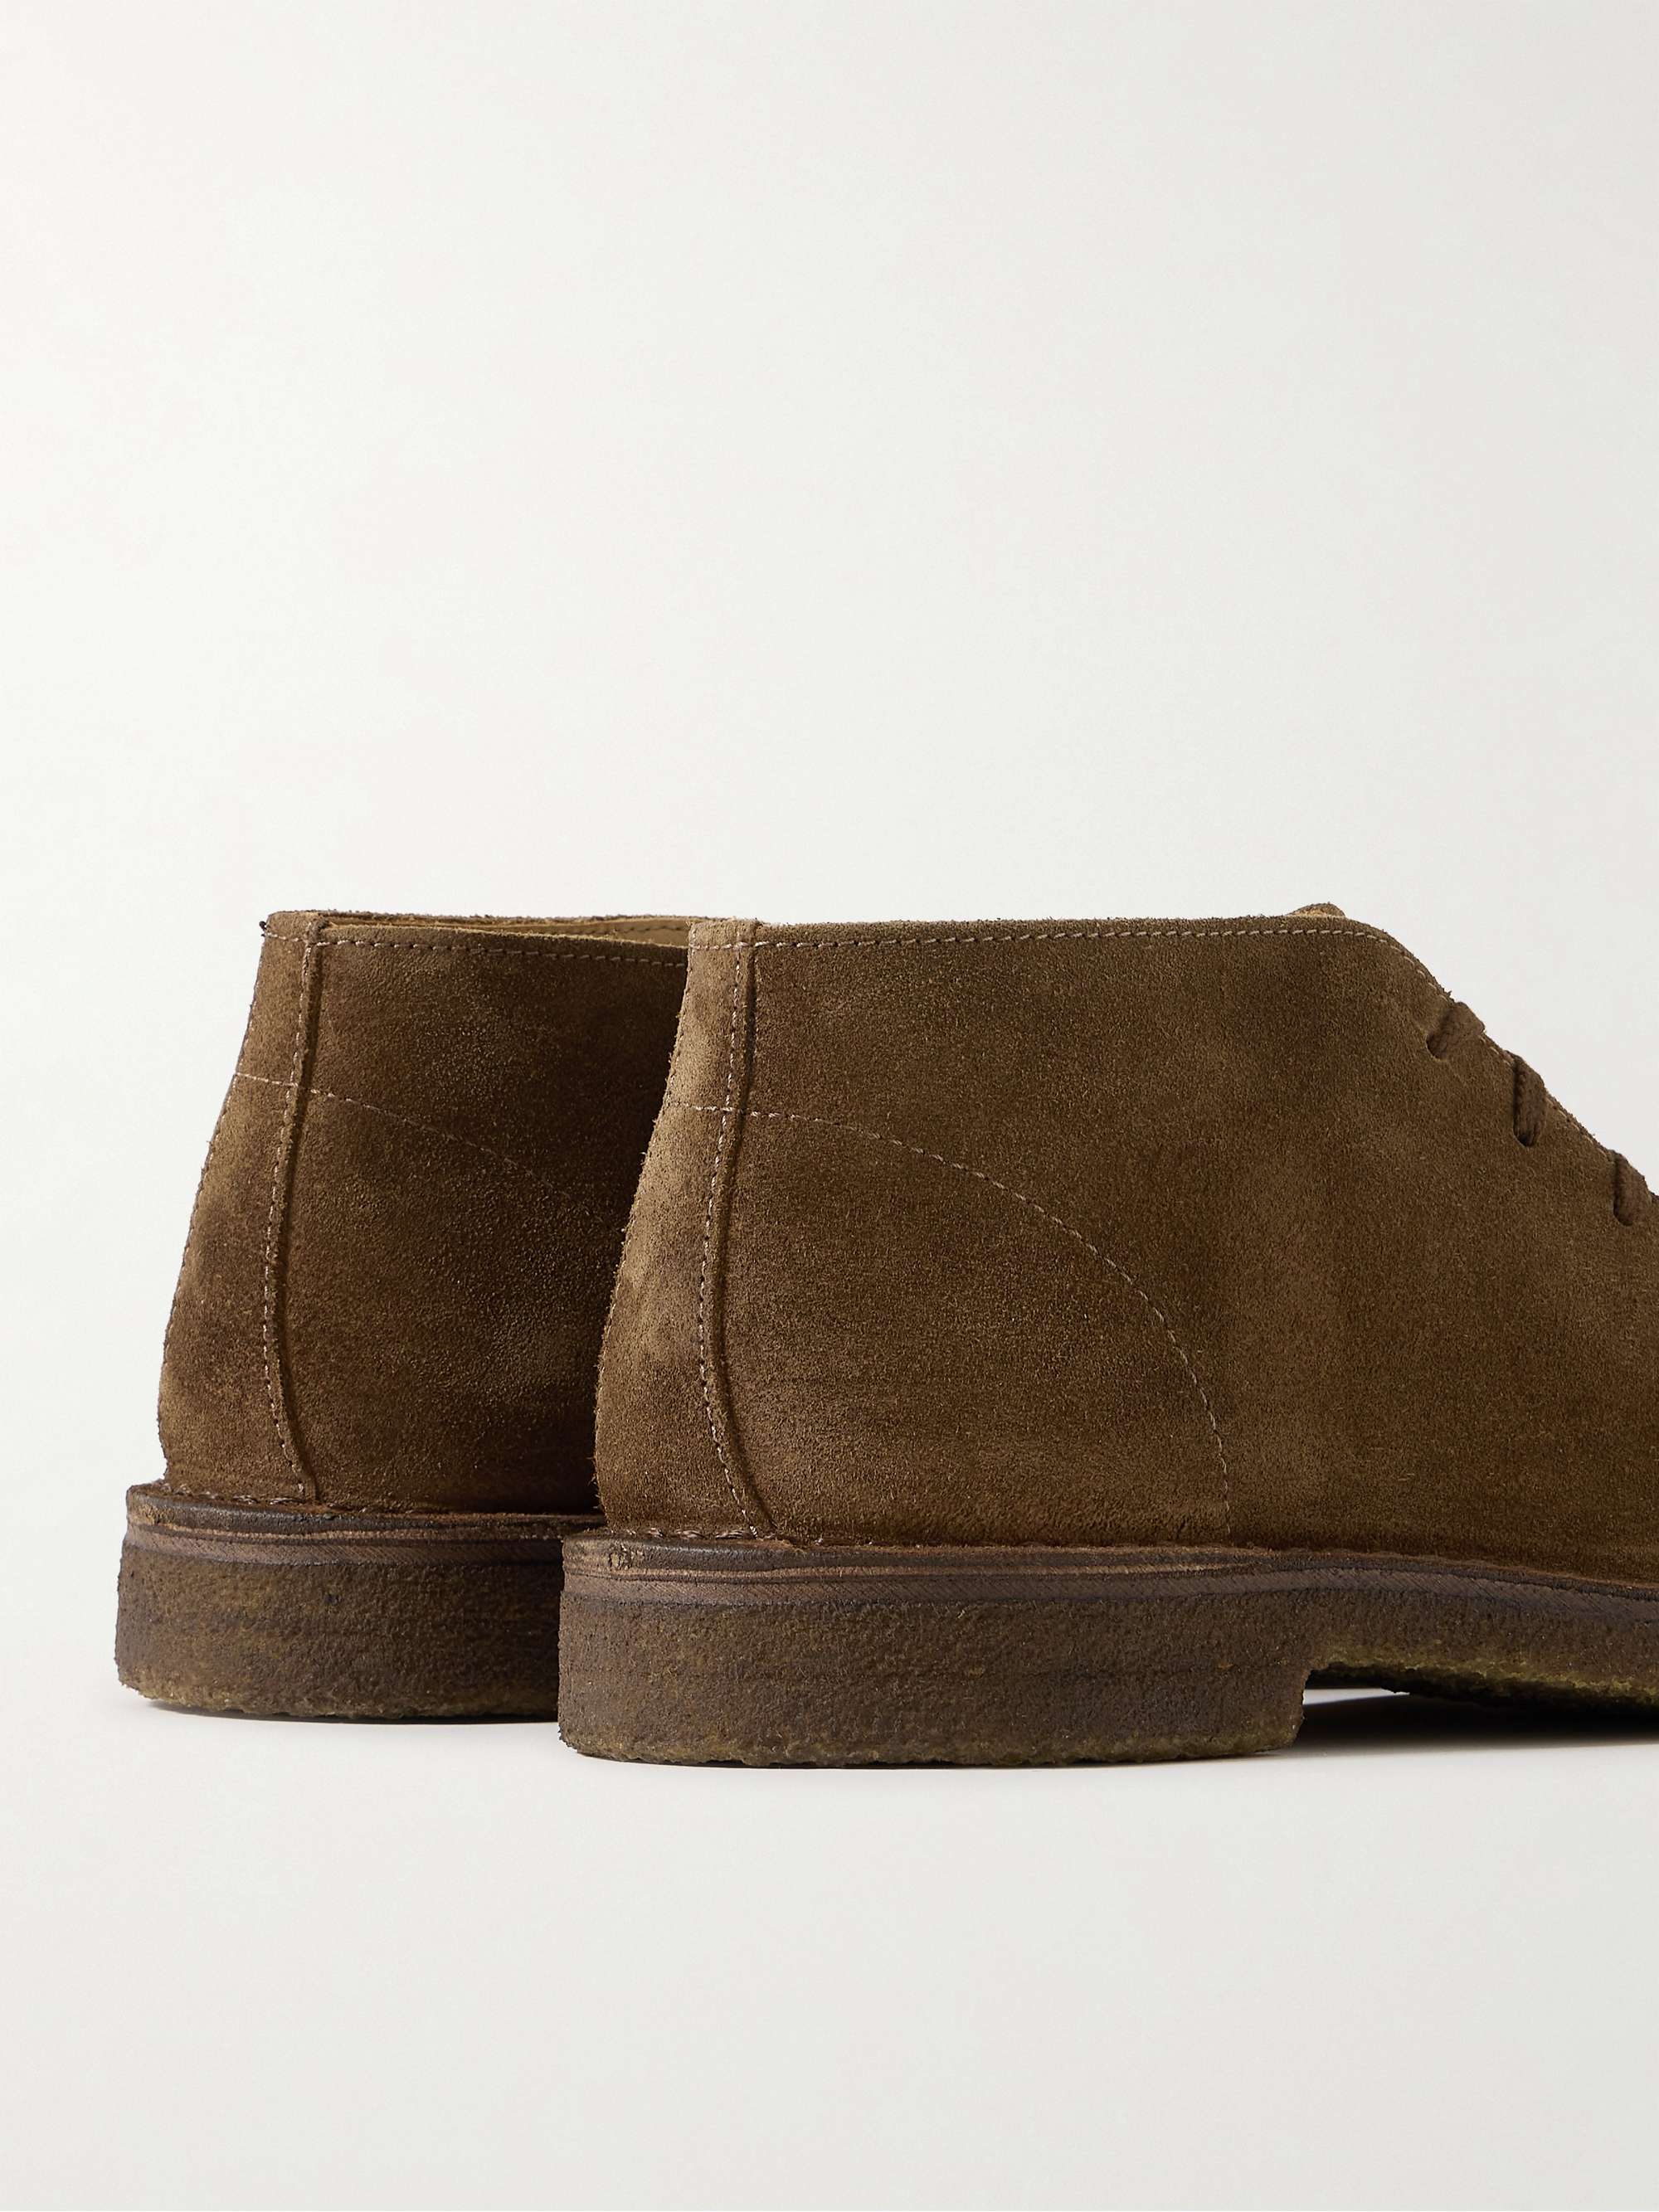 DRAKE'S Crosby Suede Chukka Boots for Men | MR PORTER